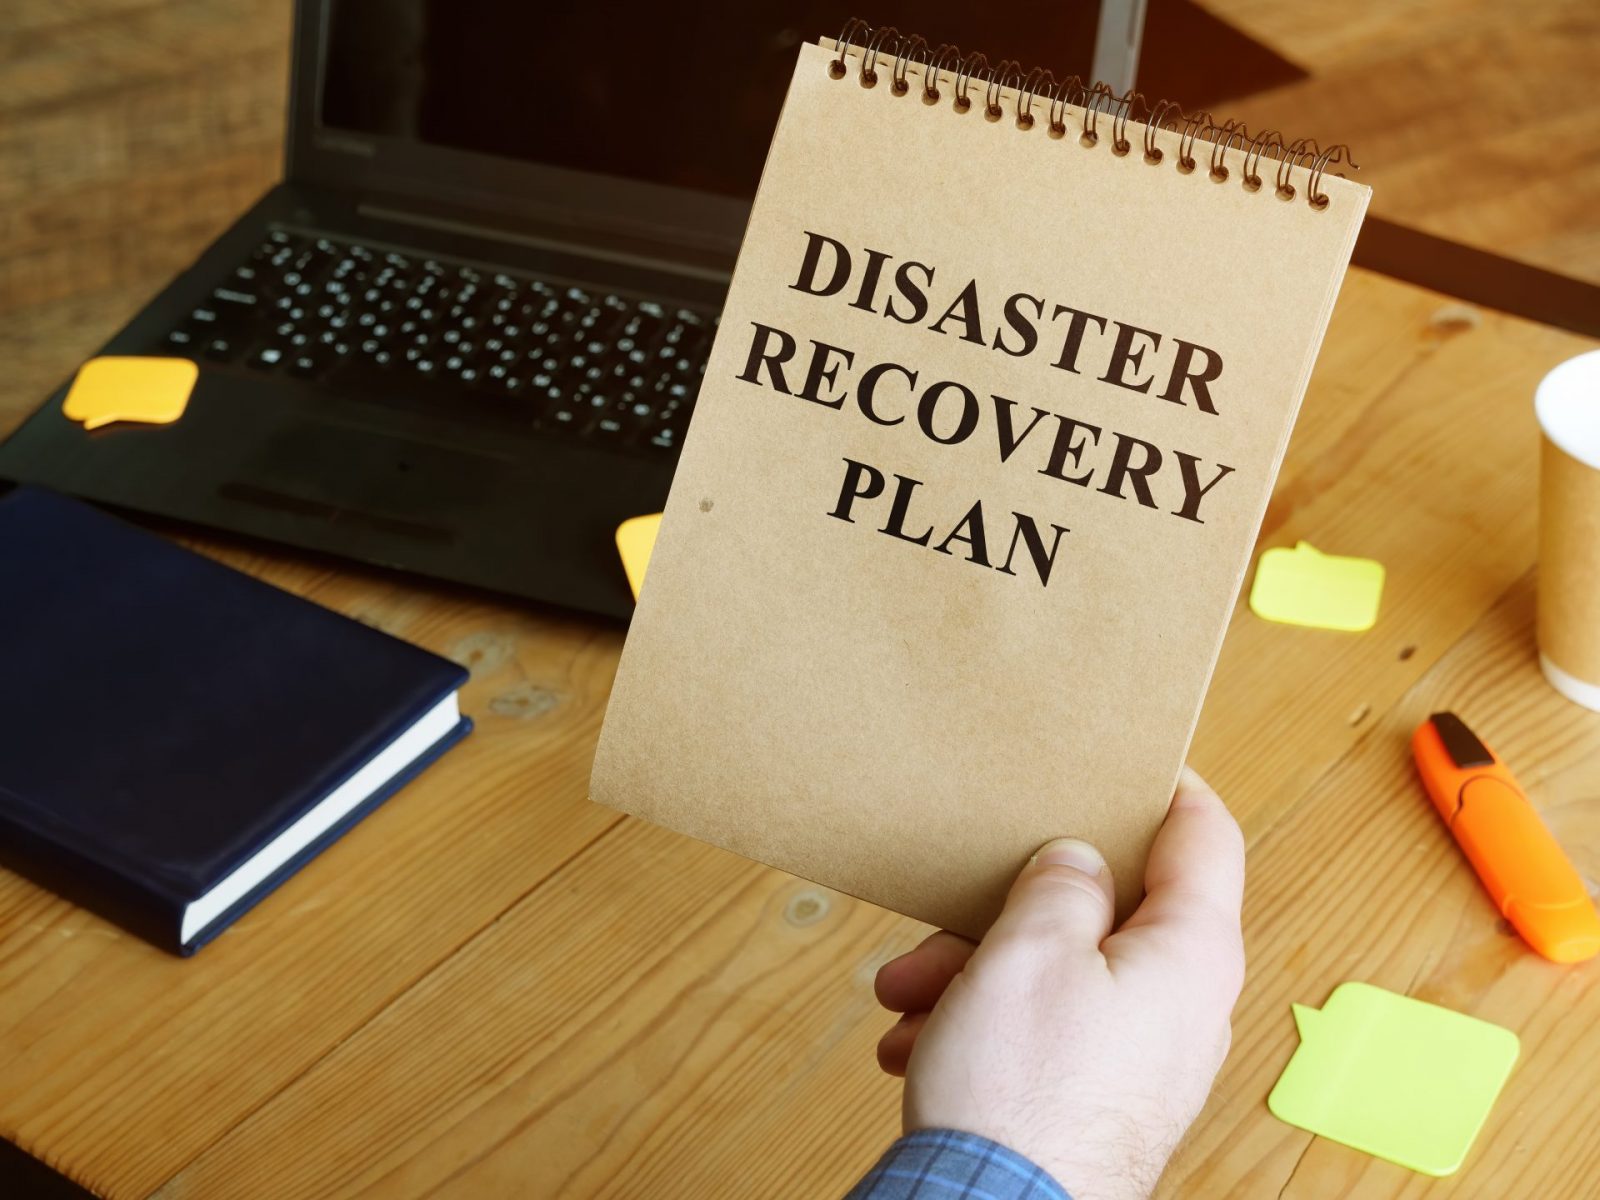 Disaster Recovery Plan in the man hands.